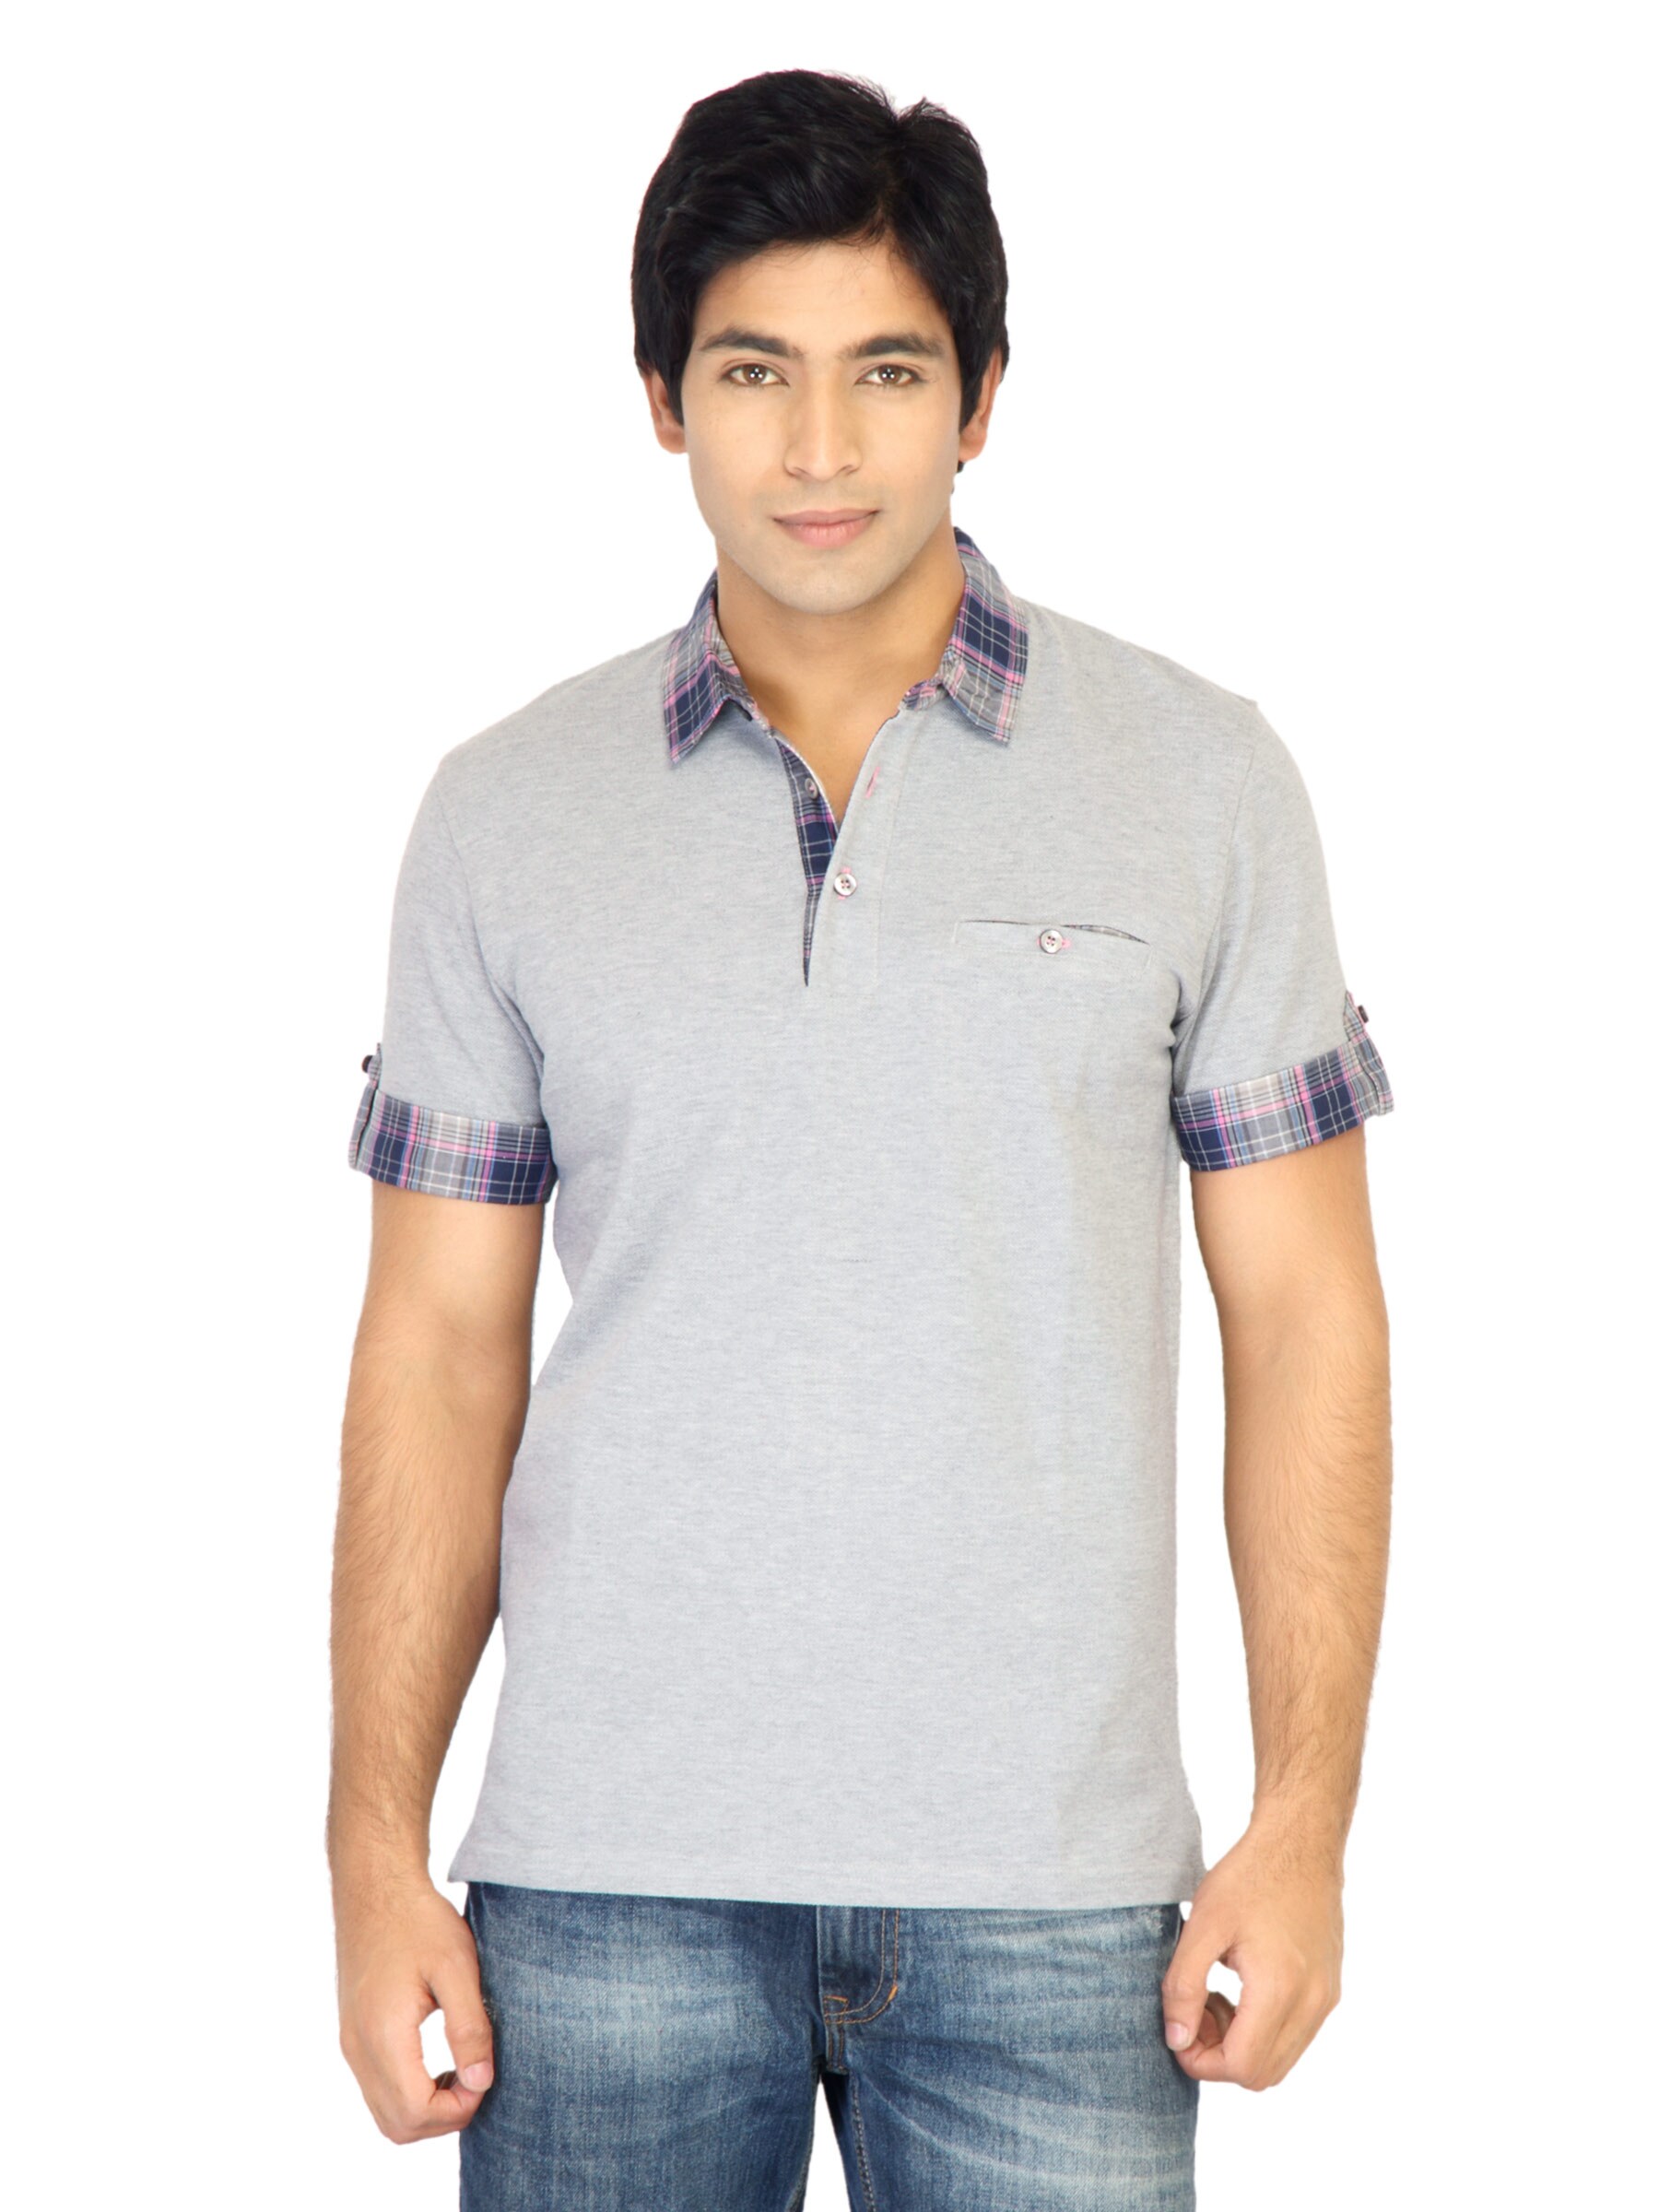 United Colors of Benetton Men Solid Grey Polo Tshirts